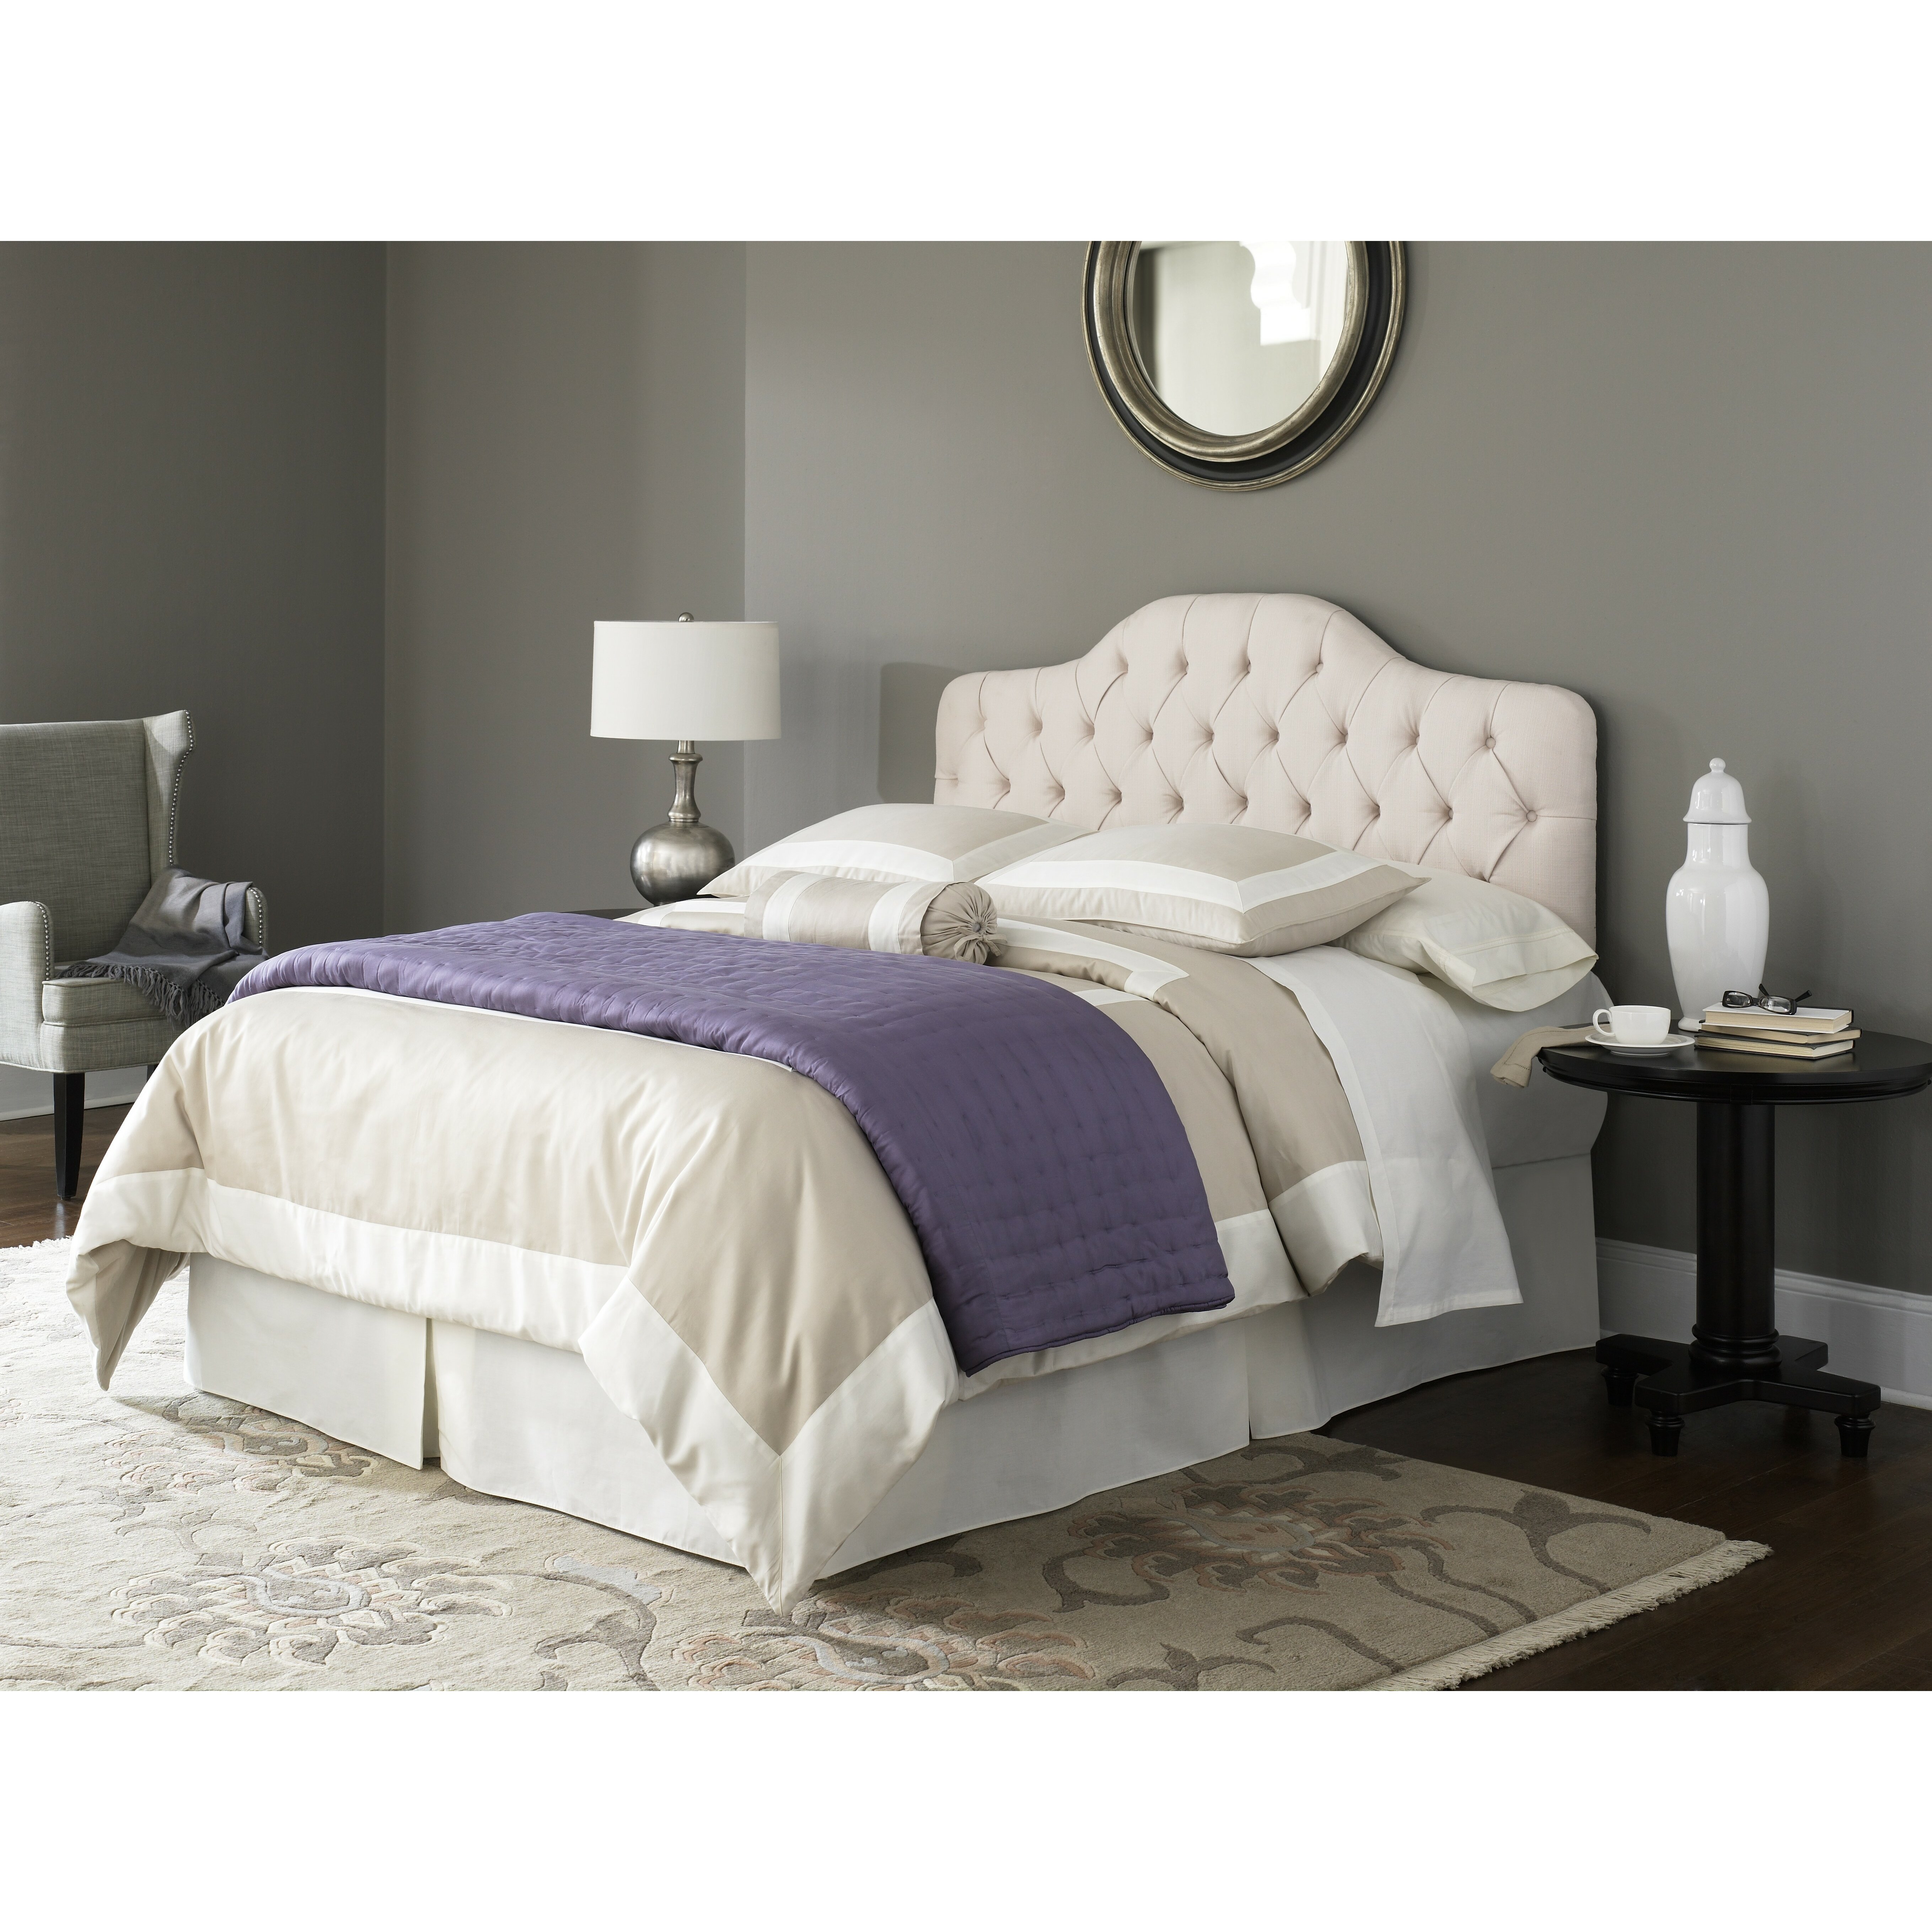 Fashion Bed Group Headboards 51